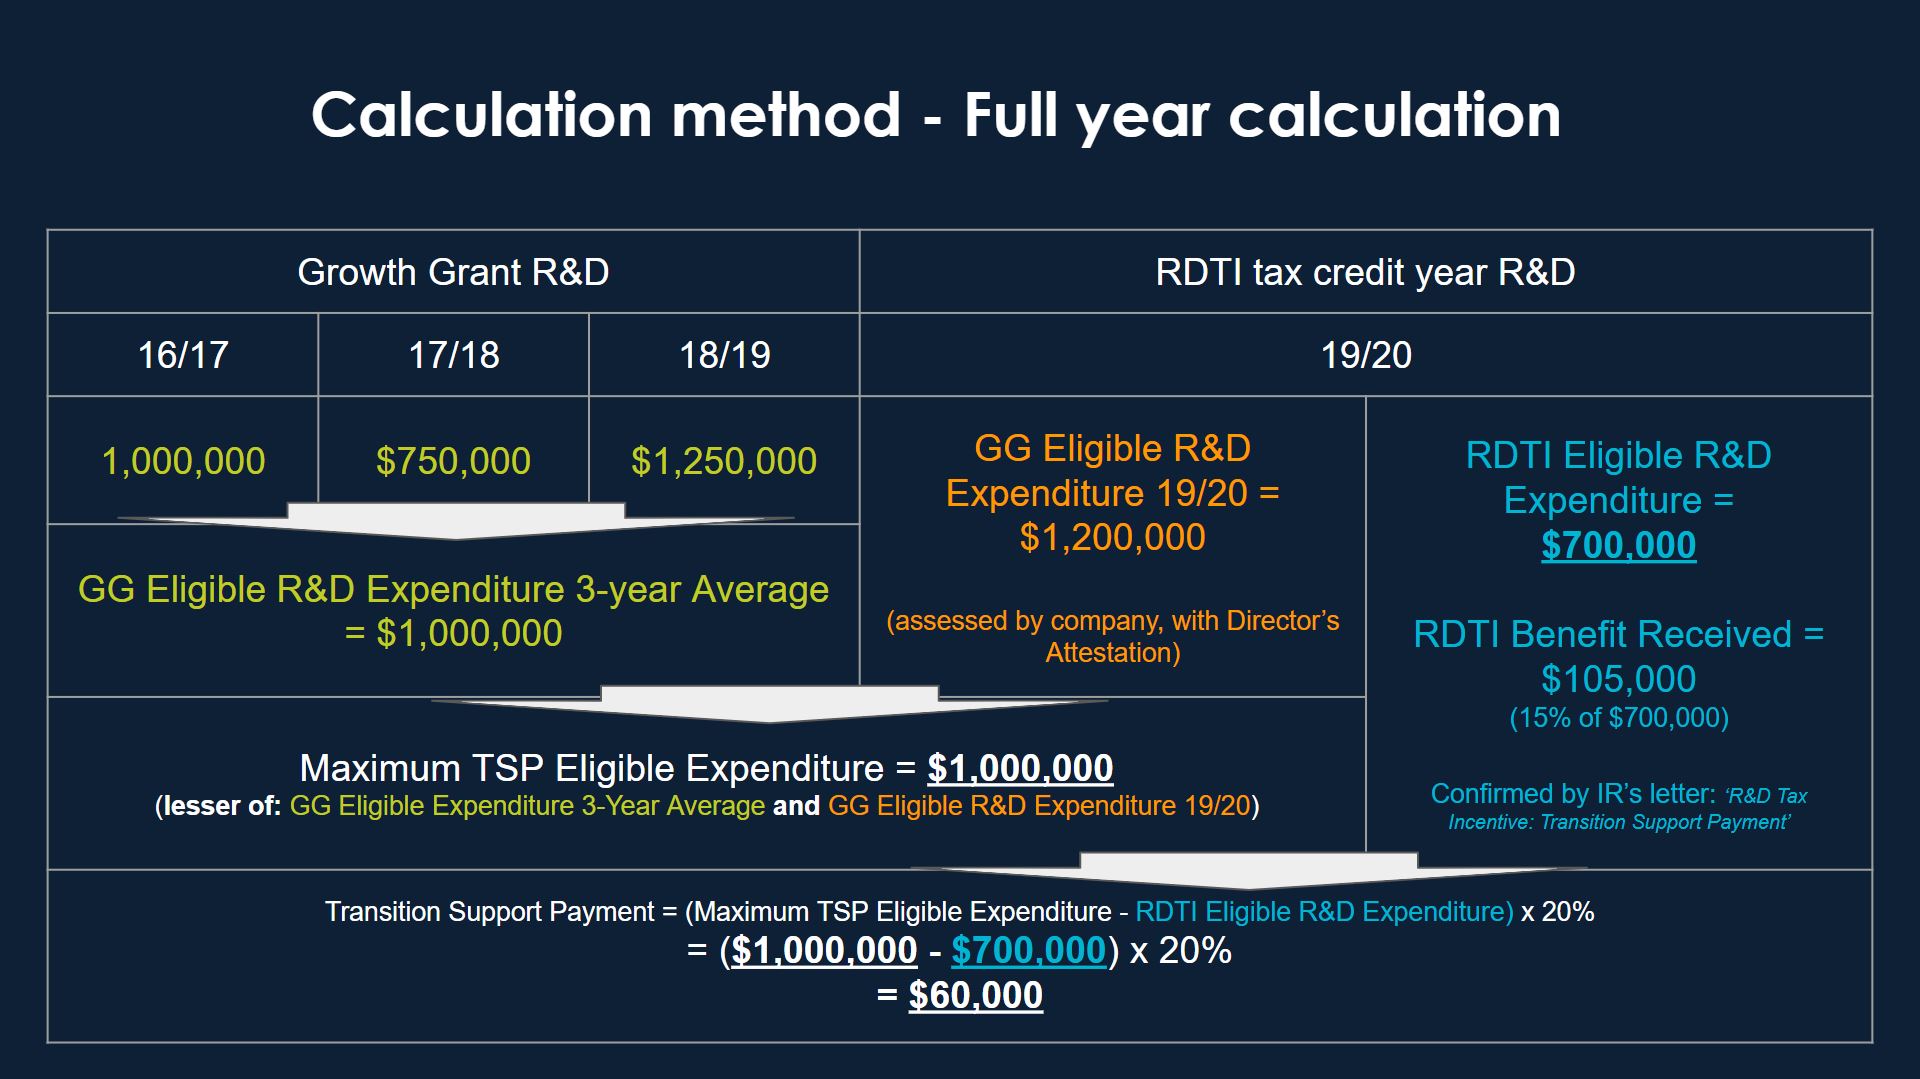 The diagram shows an example of how a full-year Transition Support Payment is calculated.